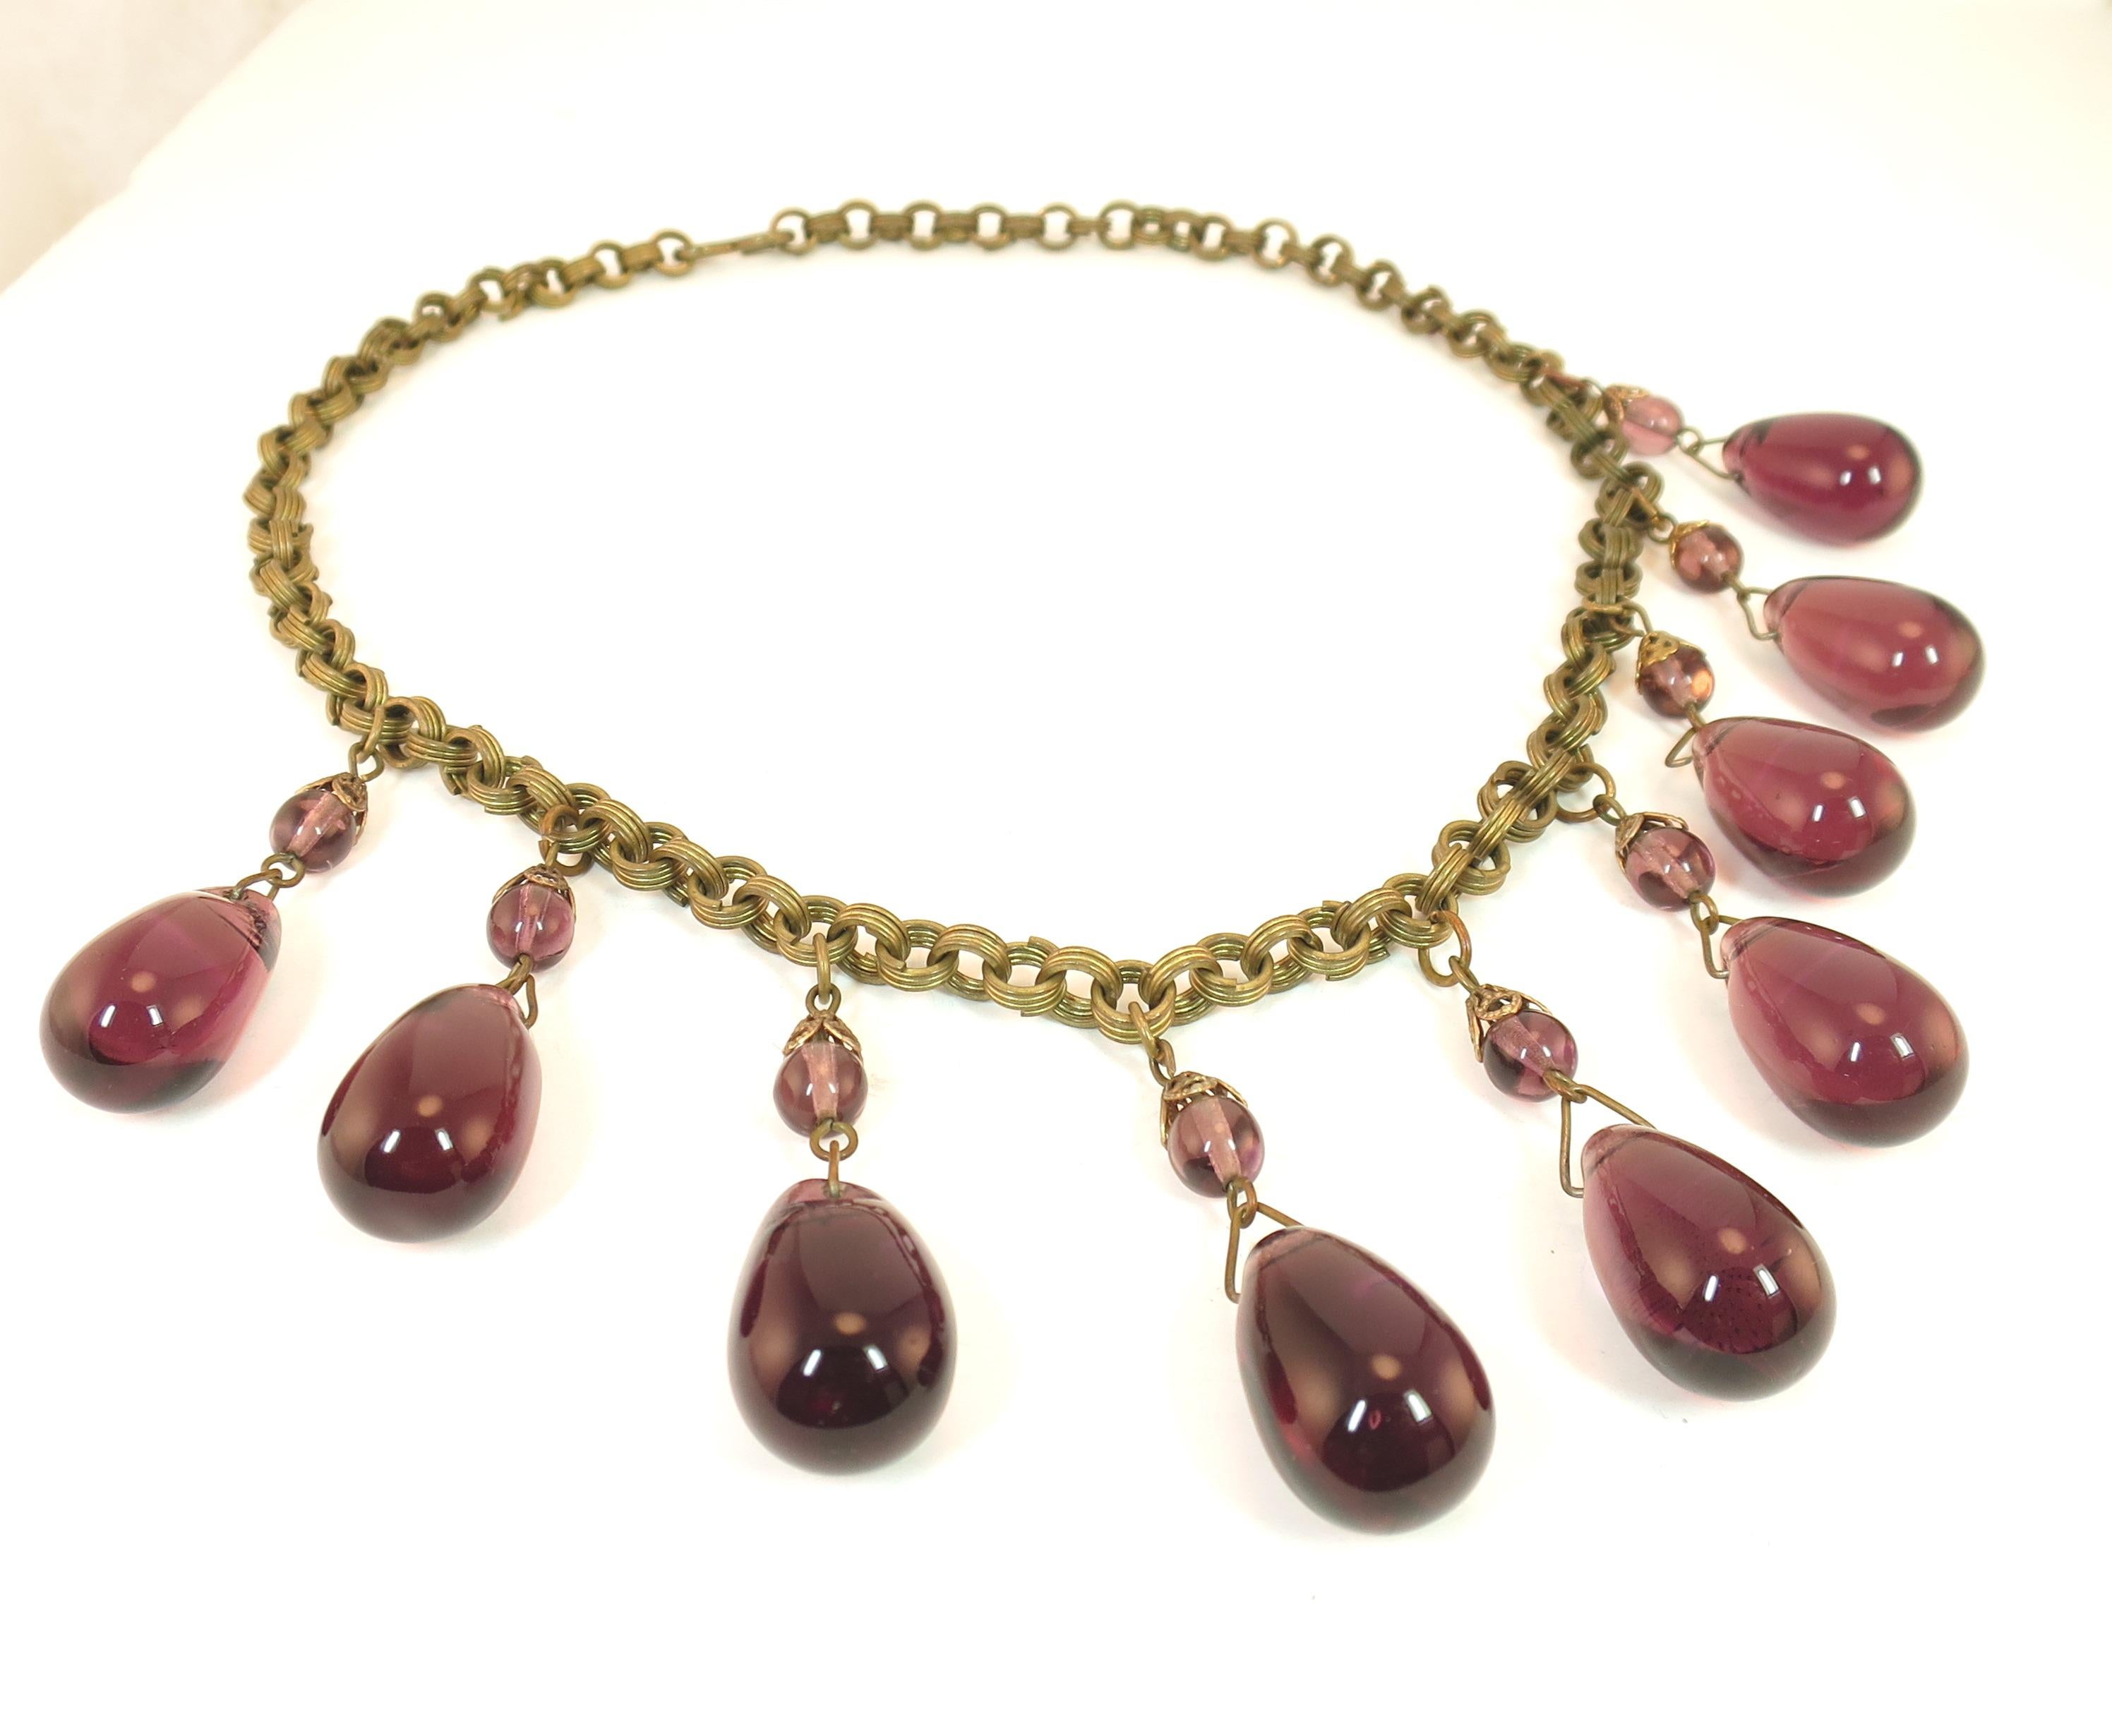 Victorian French Amethyst Poured Glass & Chain Link Necklace, 1870s For Sale 1